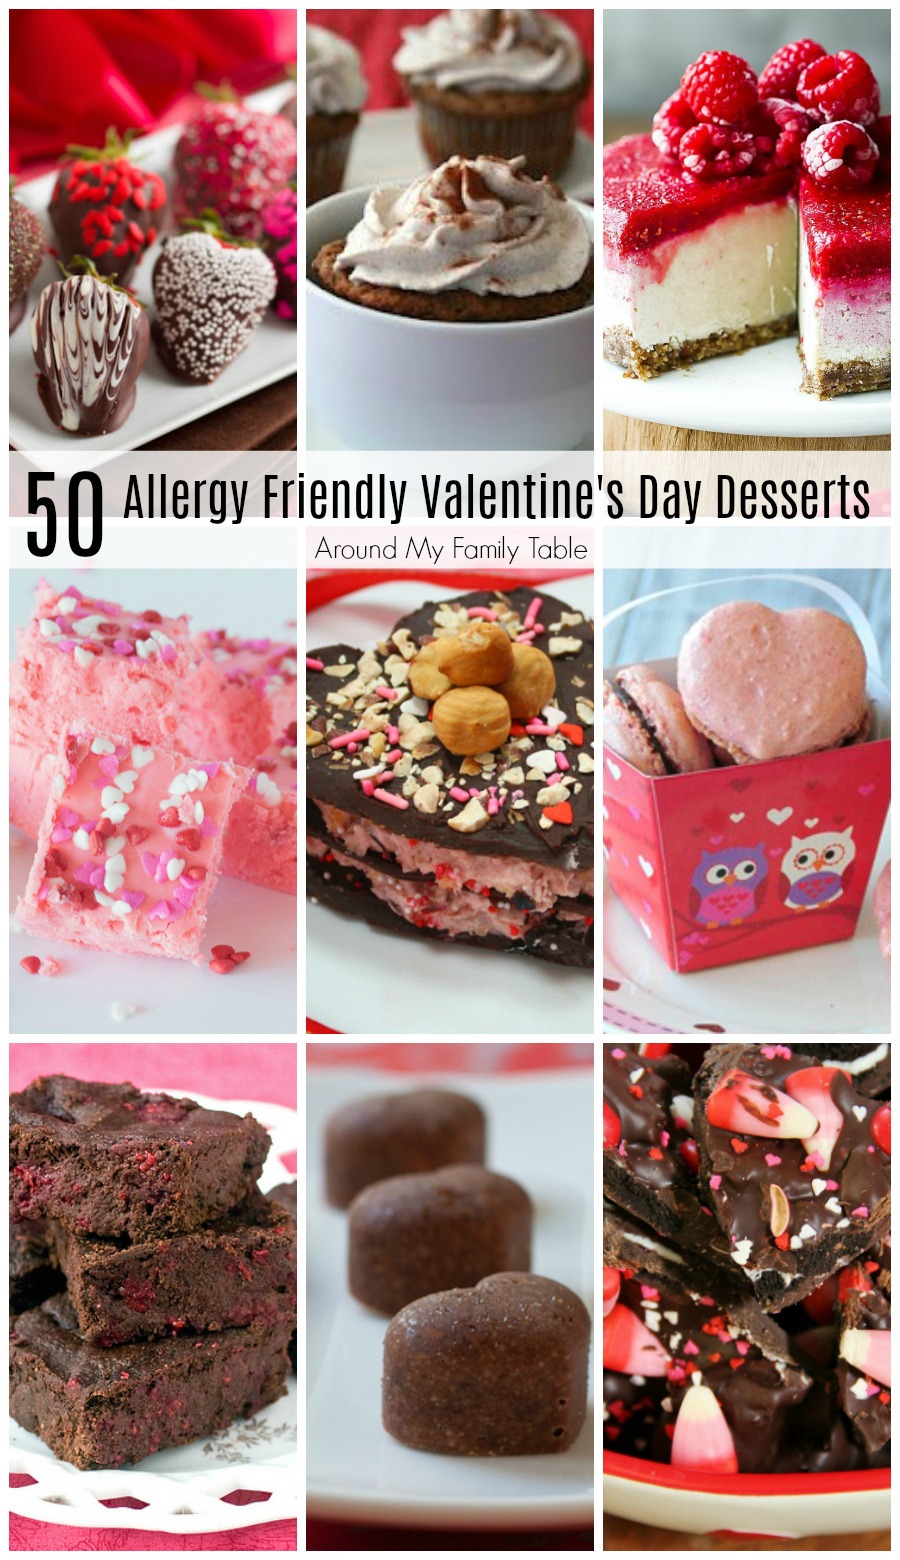 Valentineâ€™s Day is quickly coming up! Â These decadent Allergy Friendly Valentine's Desserts are sure to satisfy your sweet tooth.